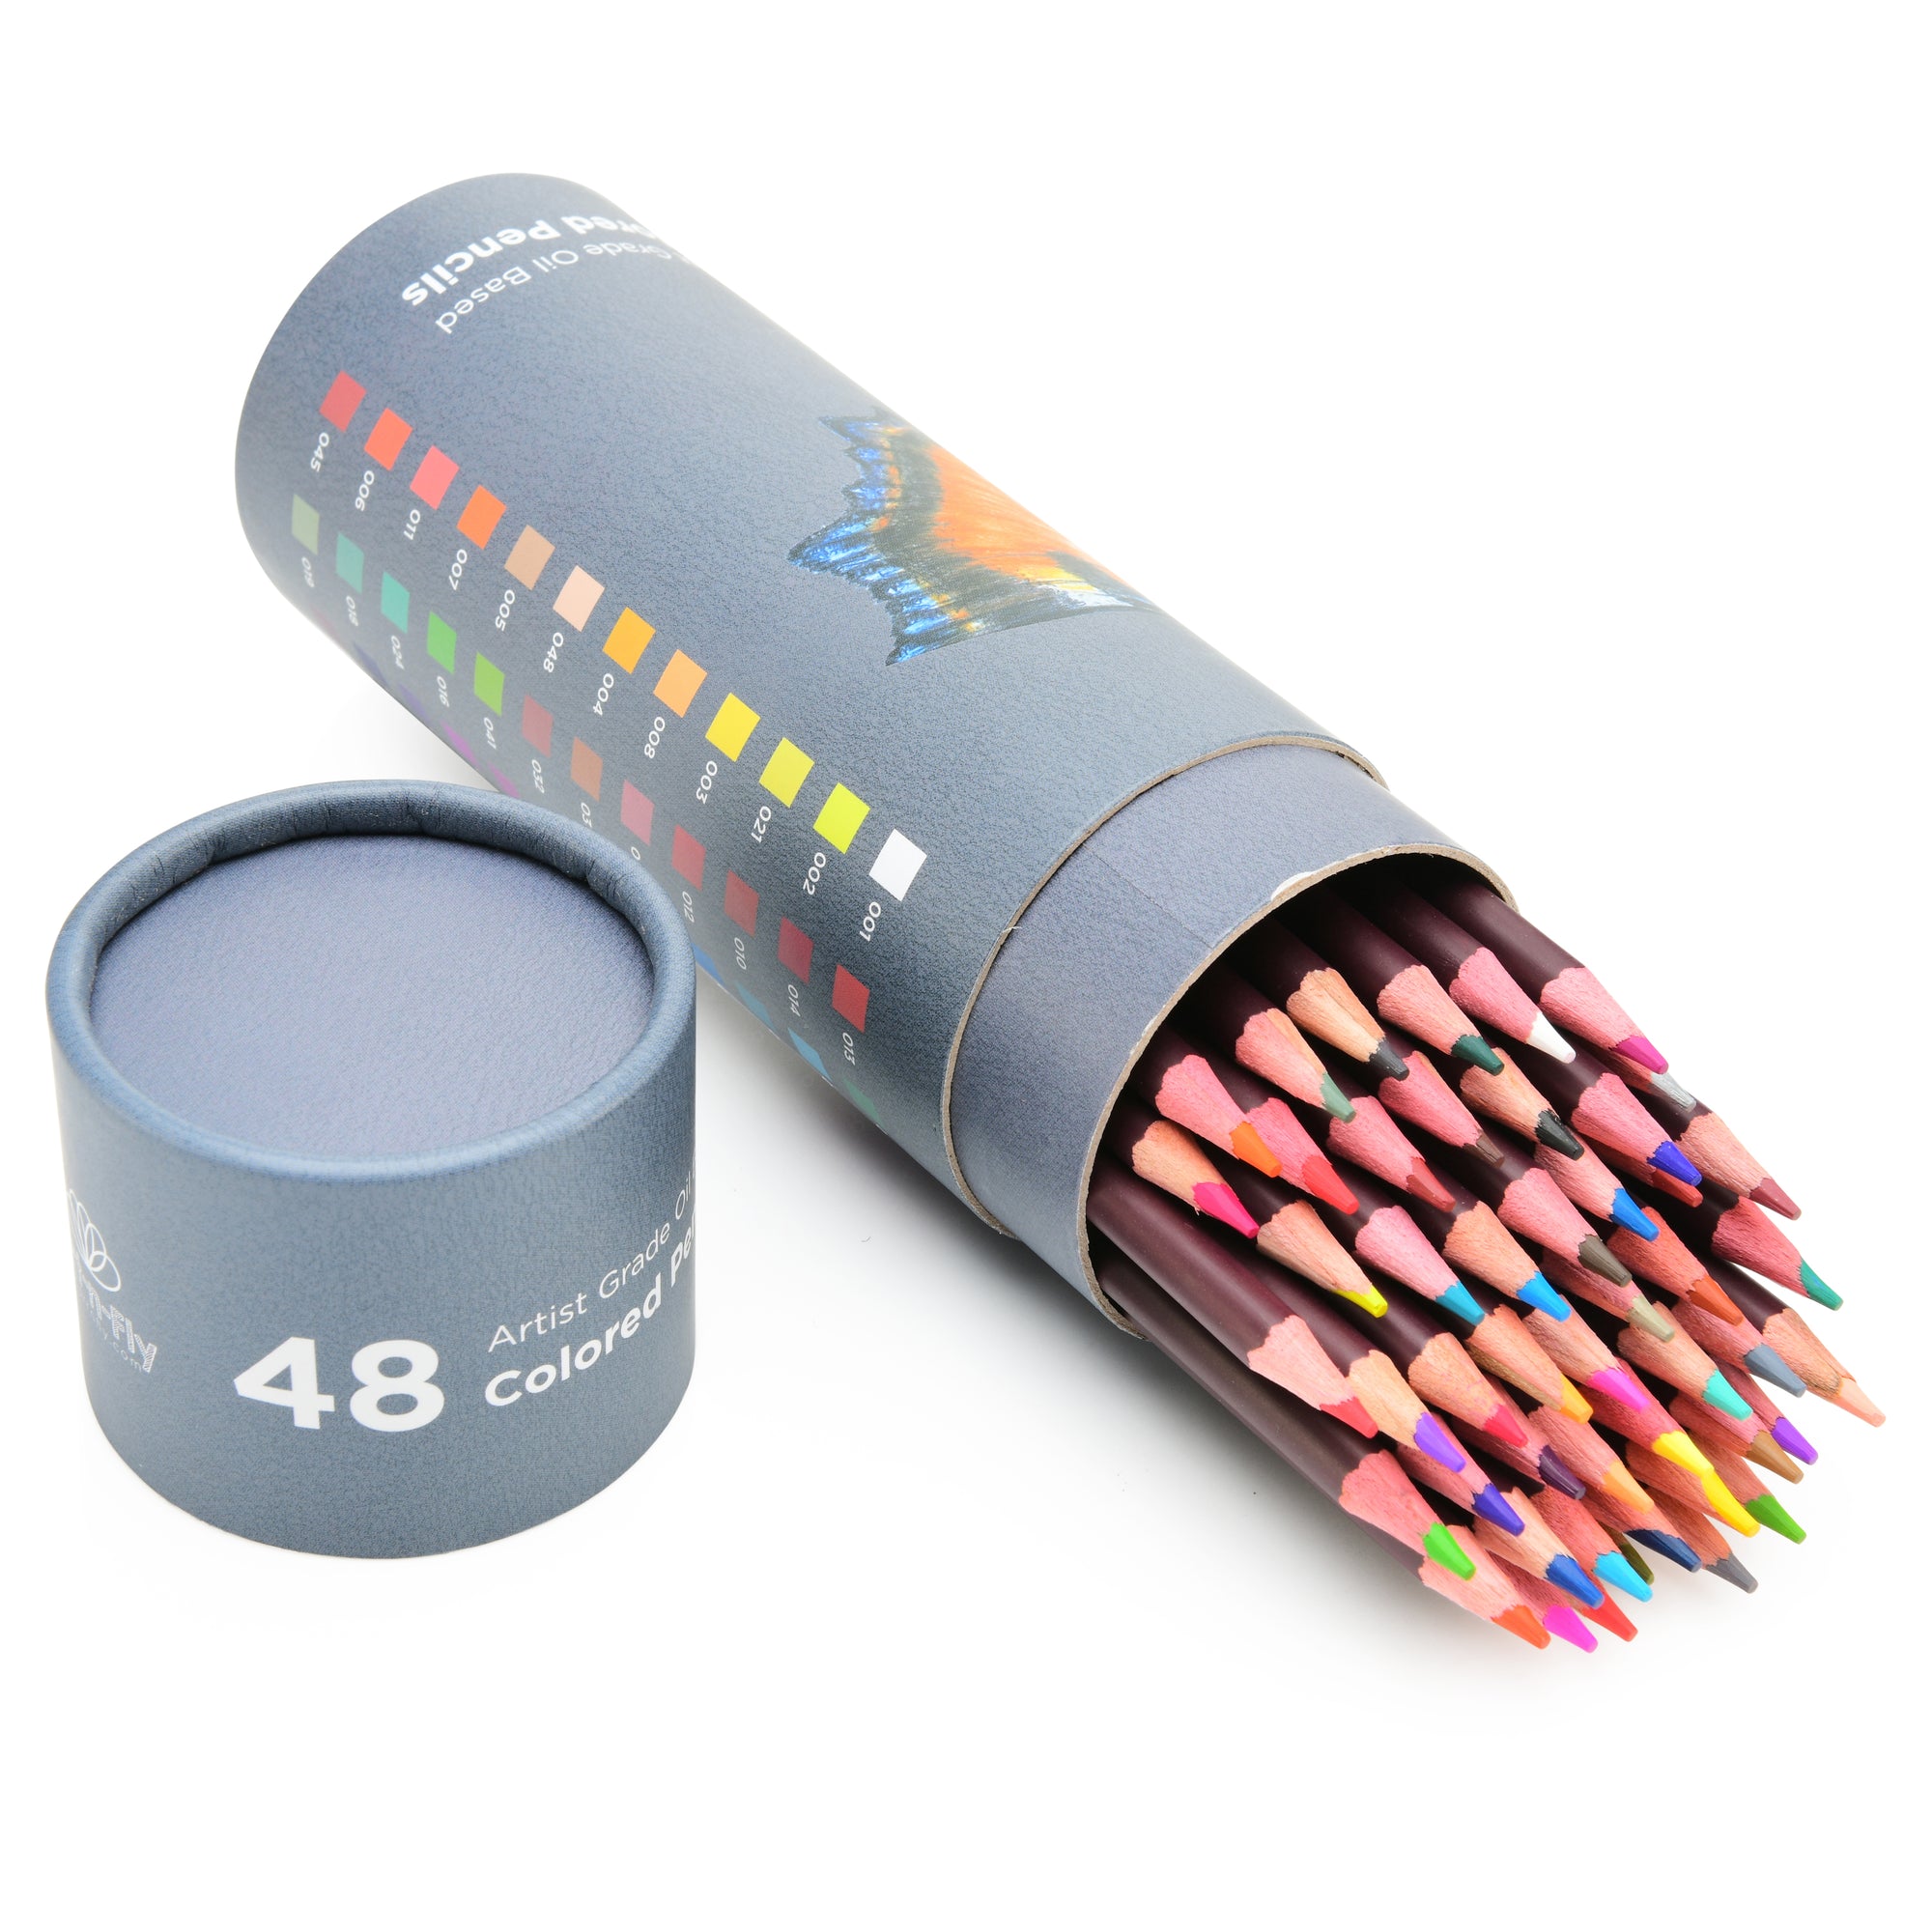  WILSHIN Colored Pencils 48 Count Artist Quality